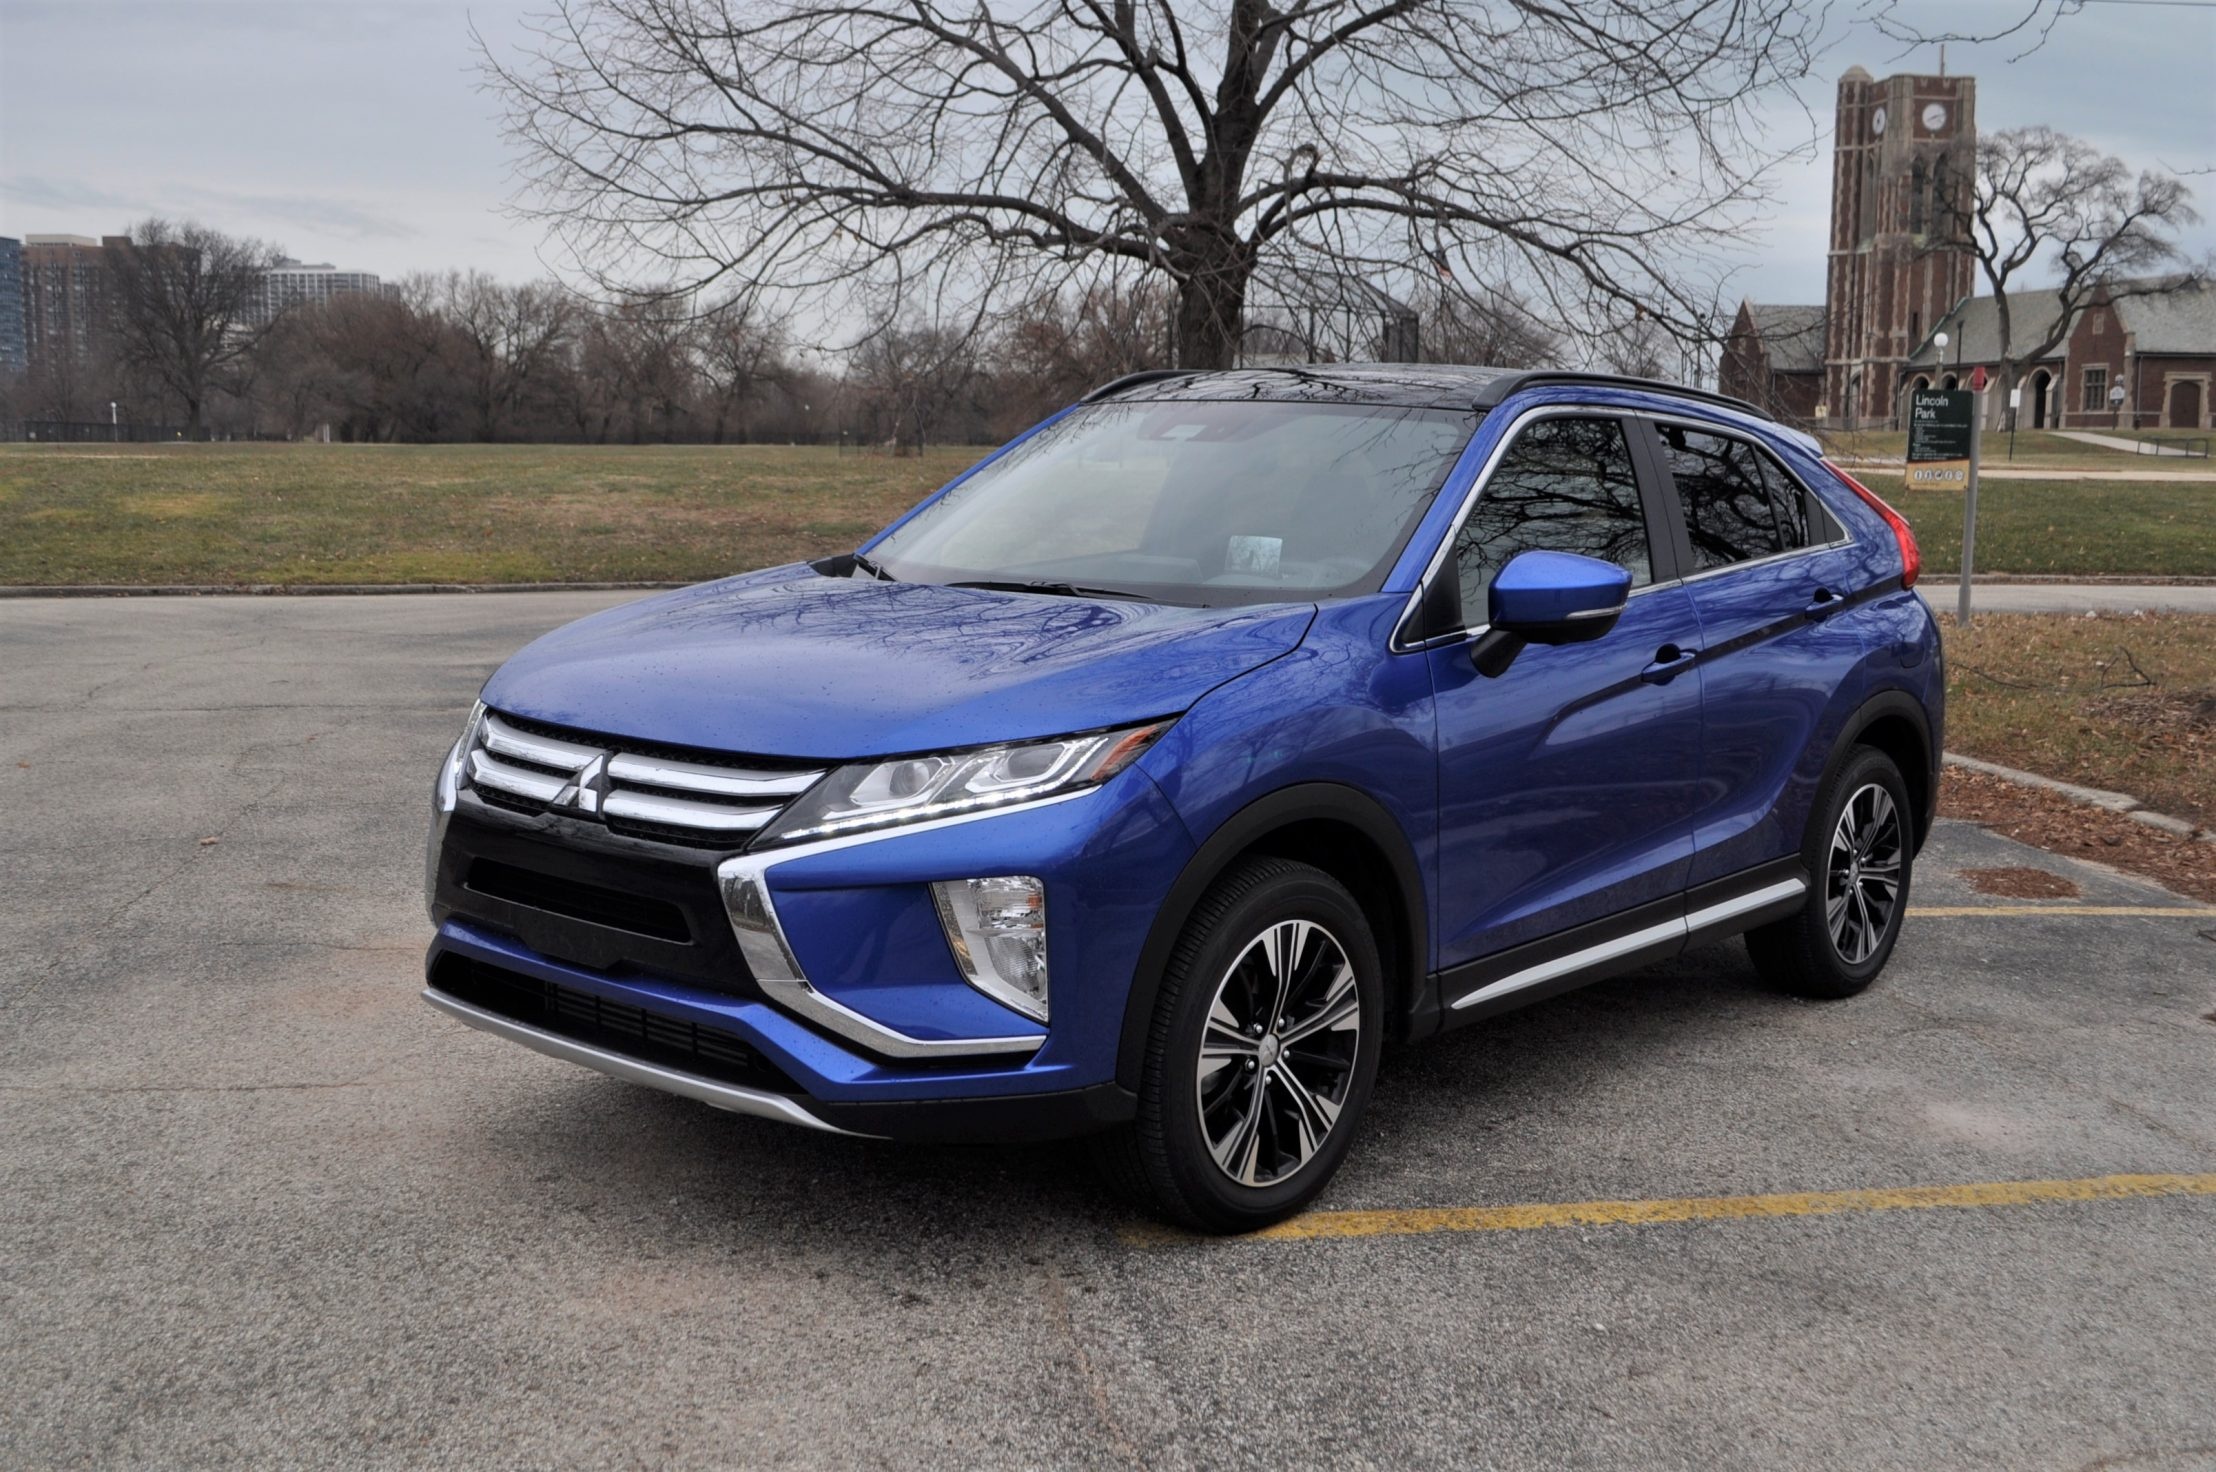 Mitsubishi Eclipse Cross, SEL S AWC model, Unique and unconventional, Review highlights, 2220x1480 HD Desktop